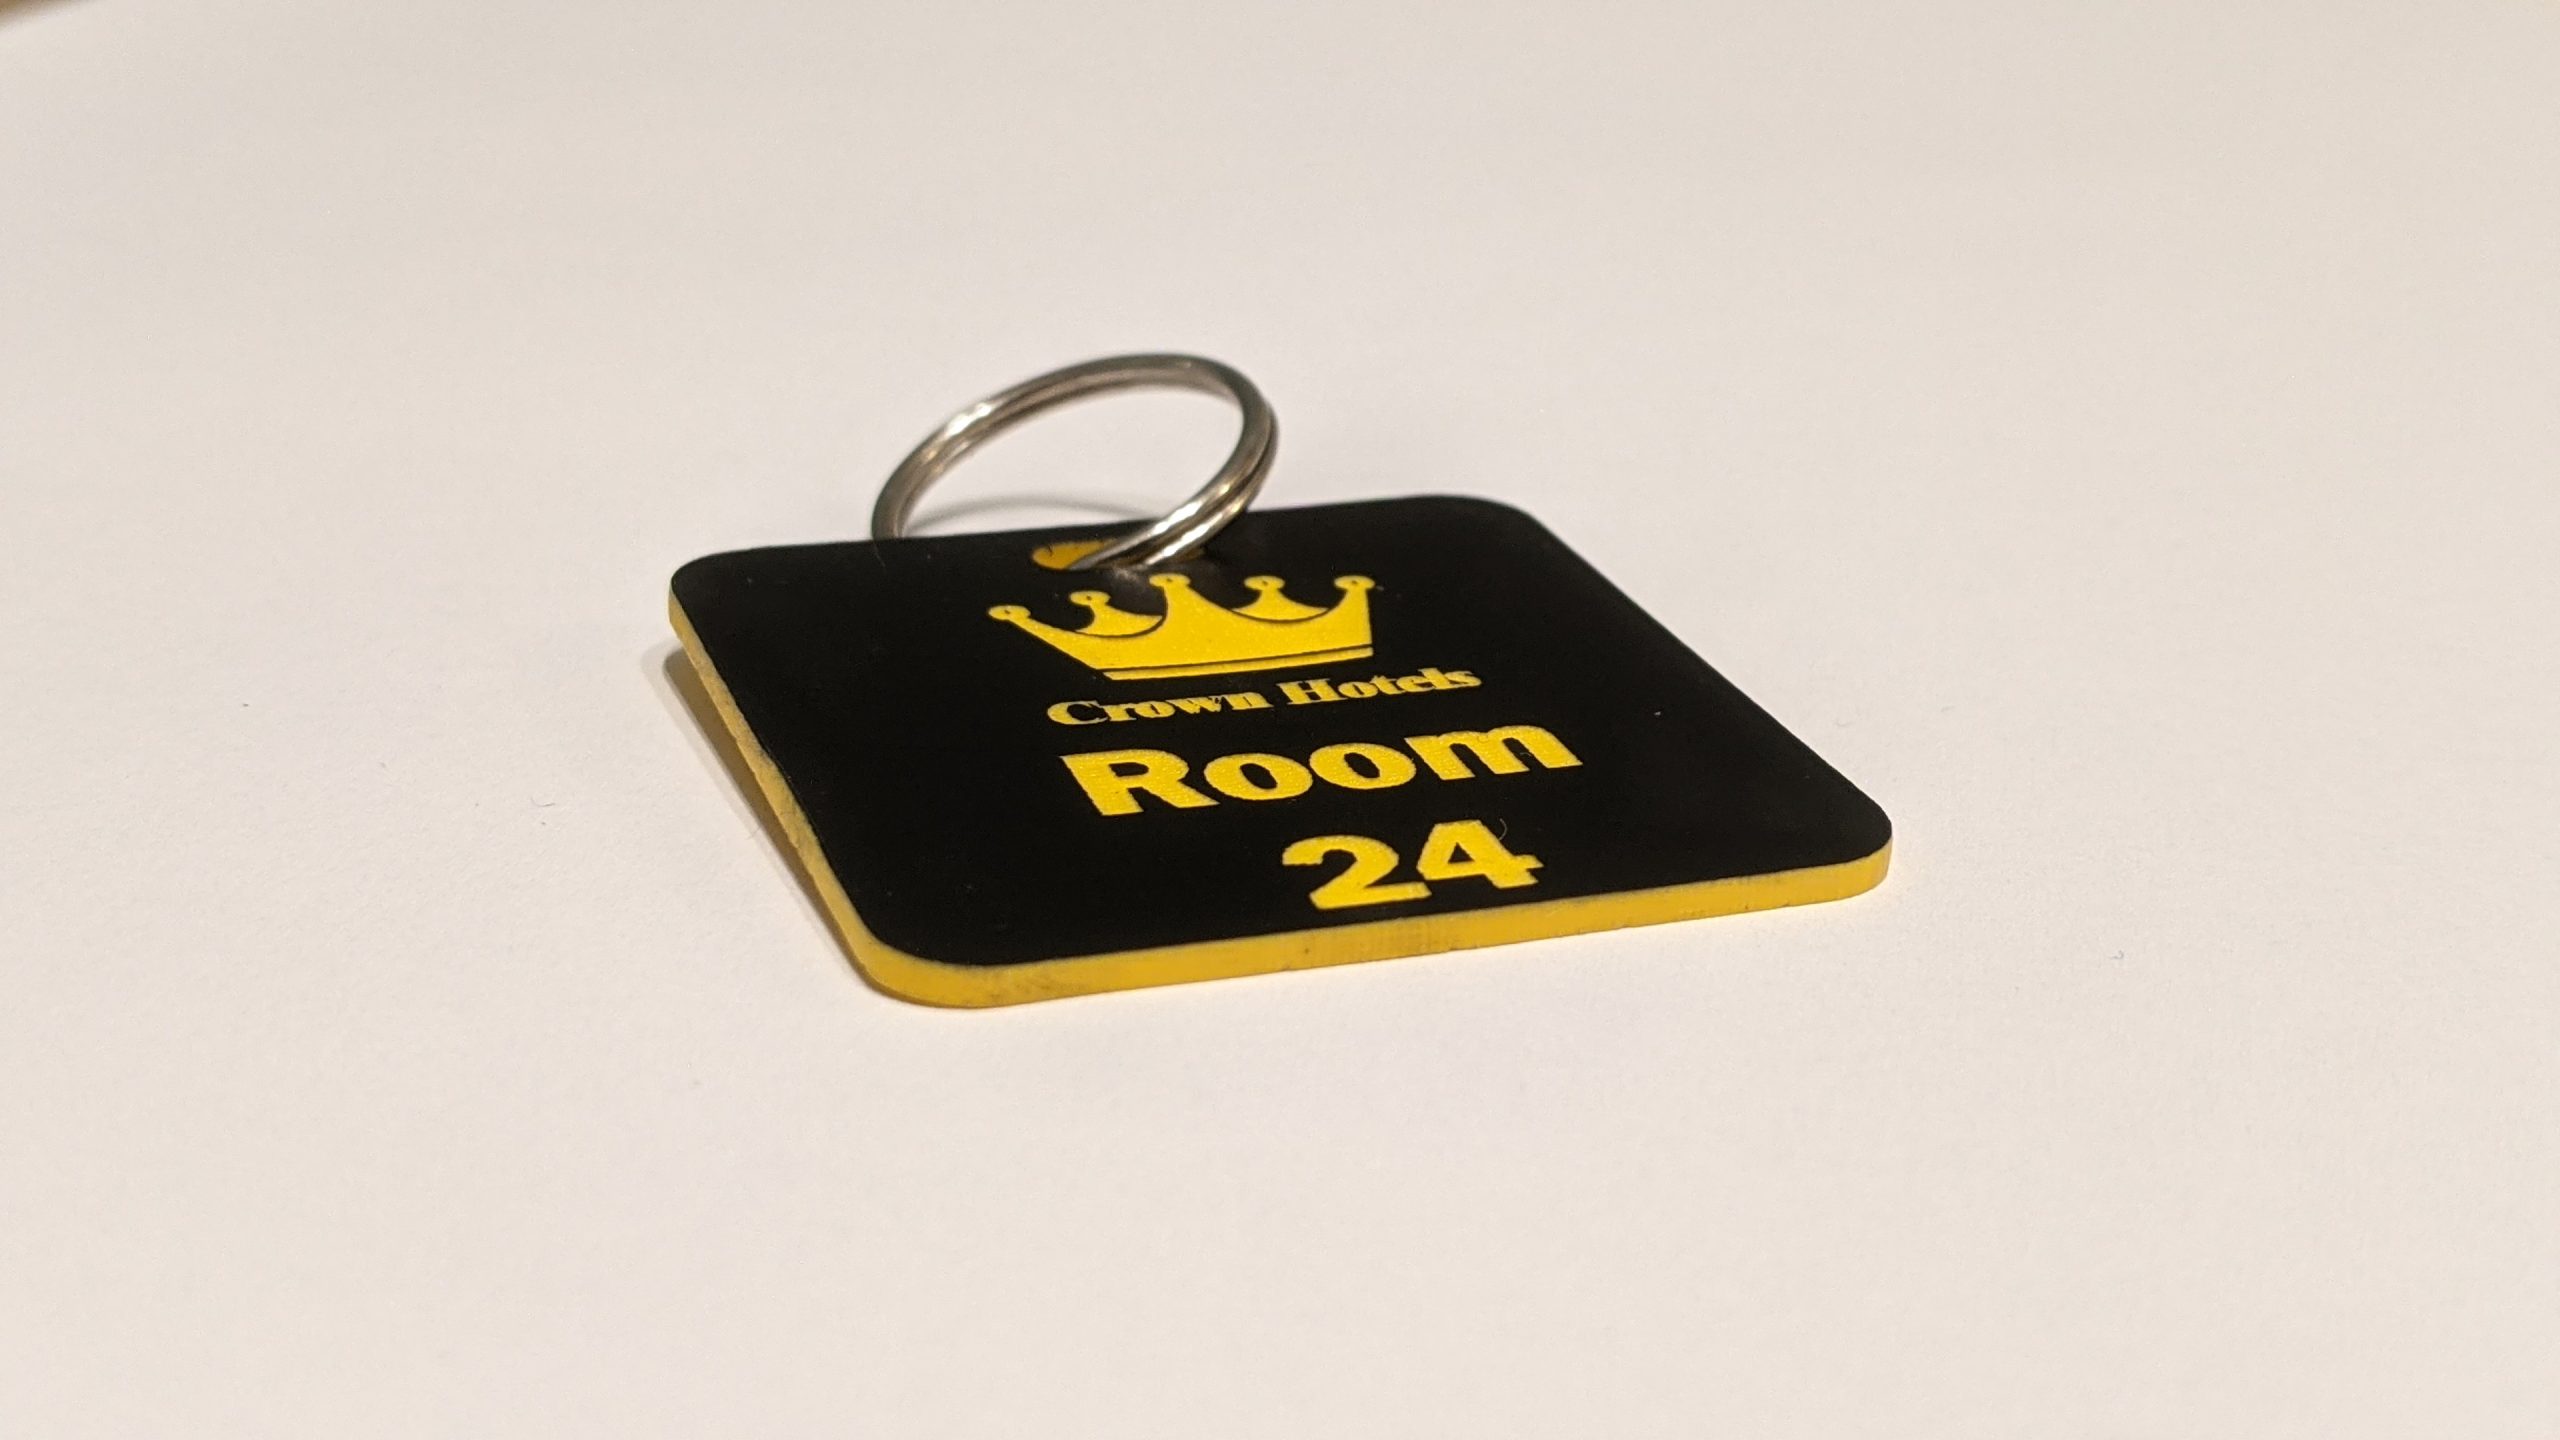 Black keyring with yellow text showing a crown logo and a door number